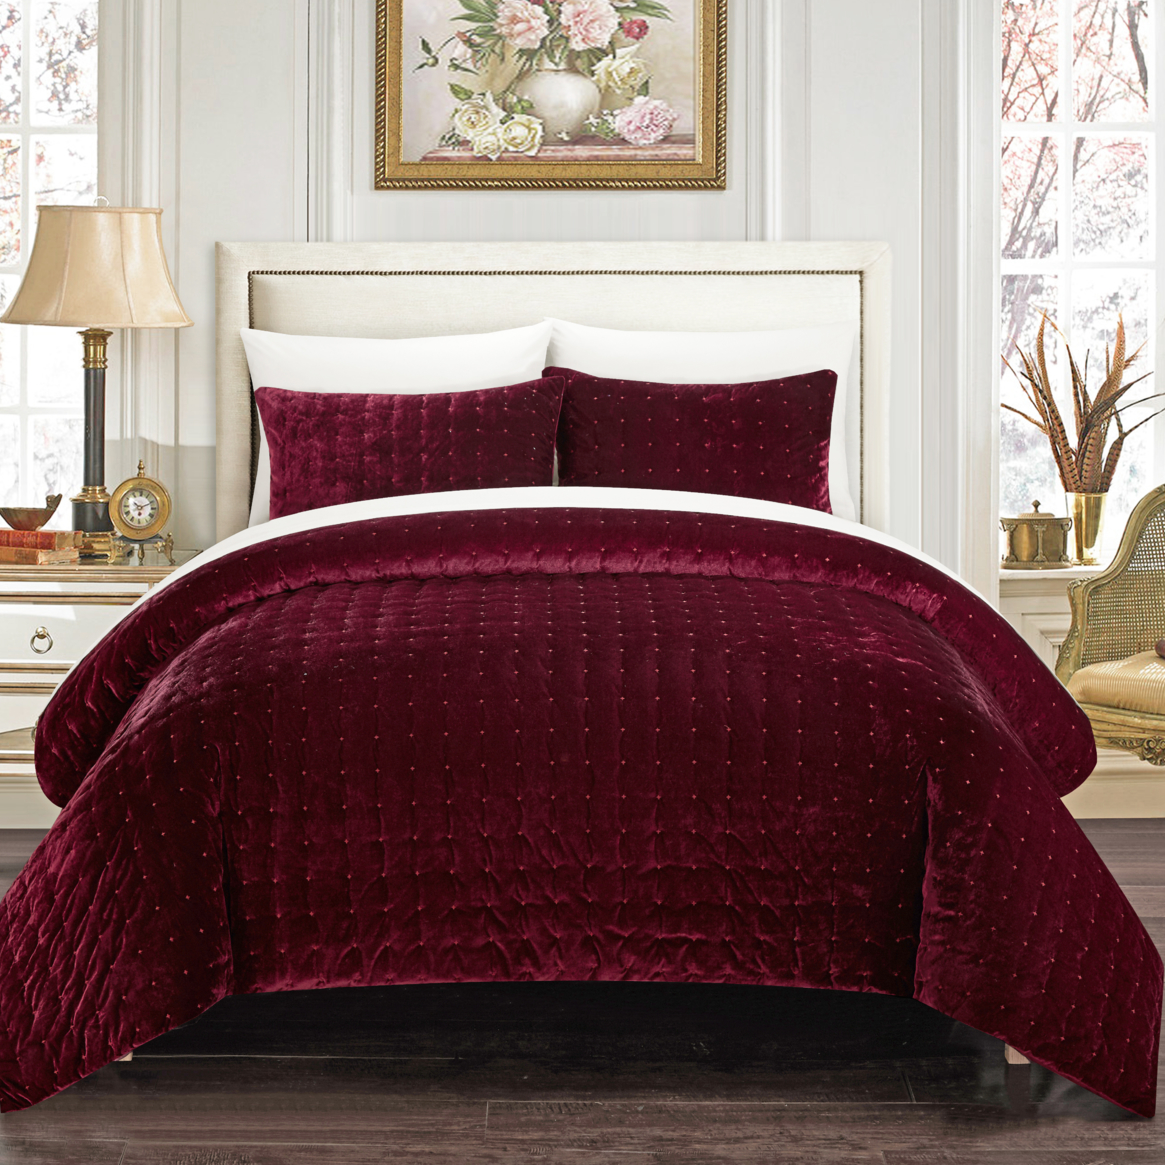 Chaya 7 Piece Comforter Set Luxurious Hand Stitched Velvet Bed In A Bag Bedding - Burgundy, King